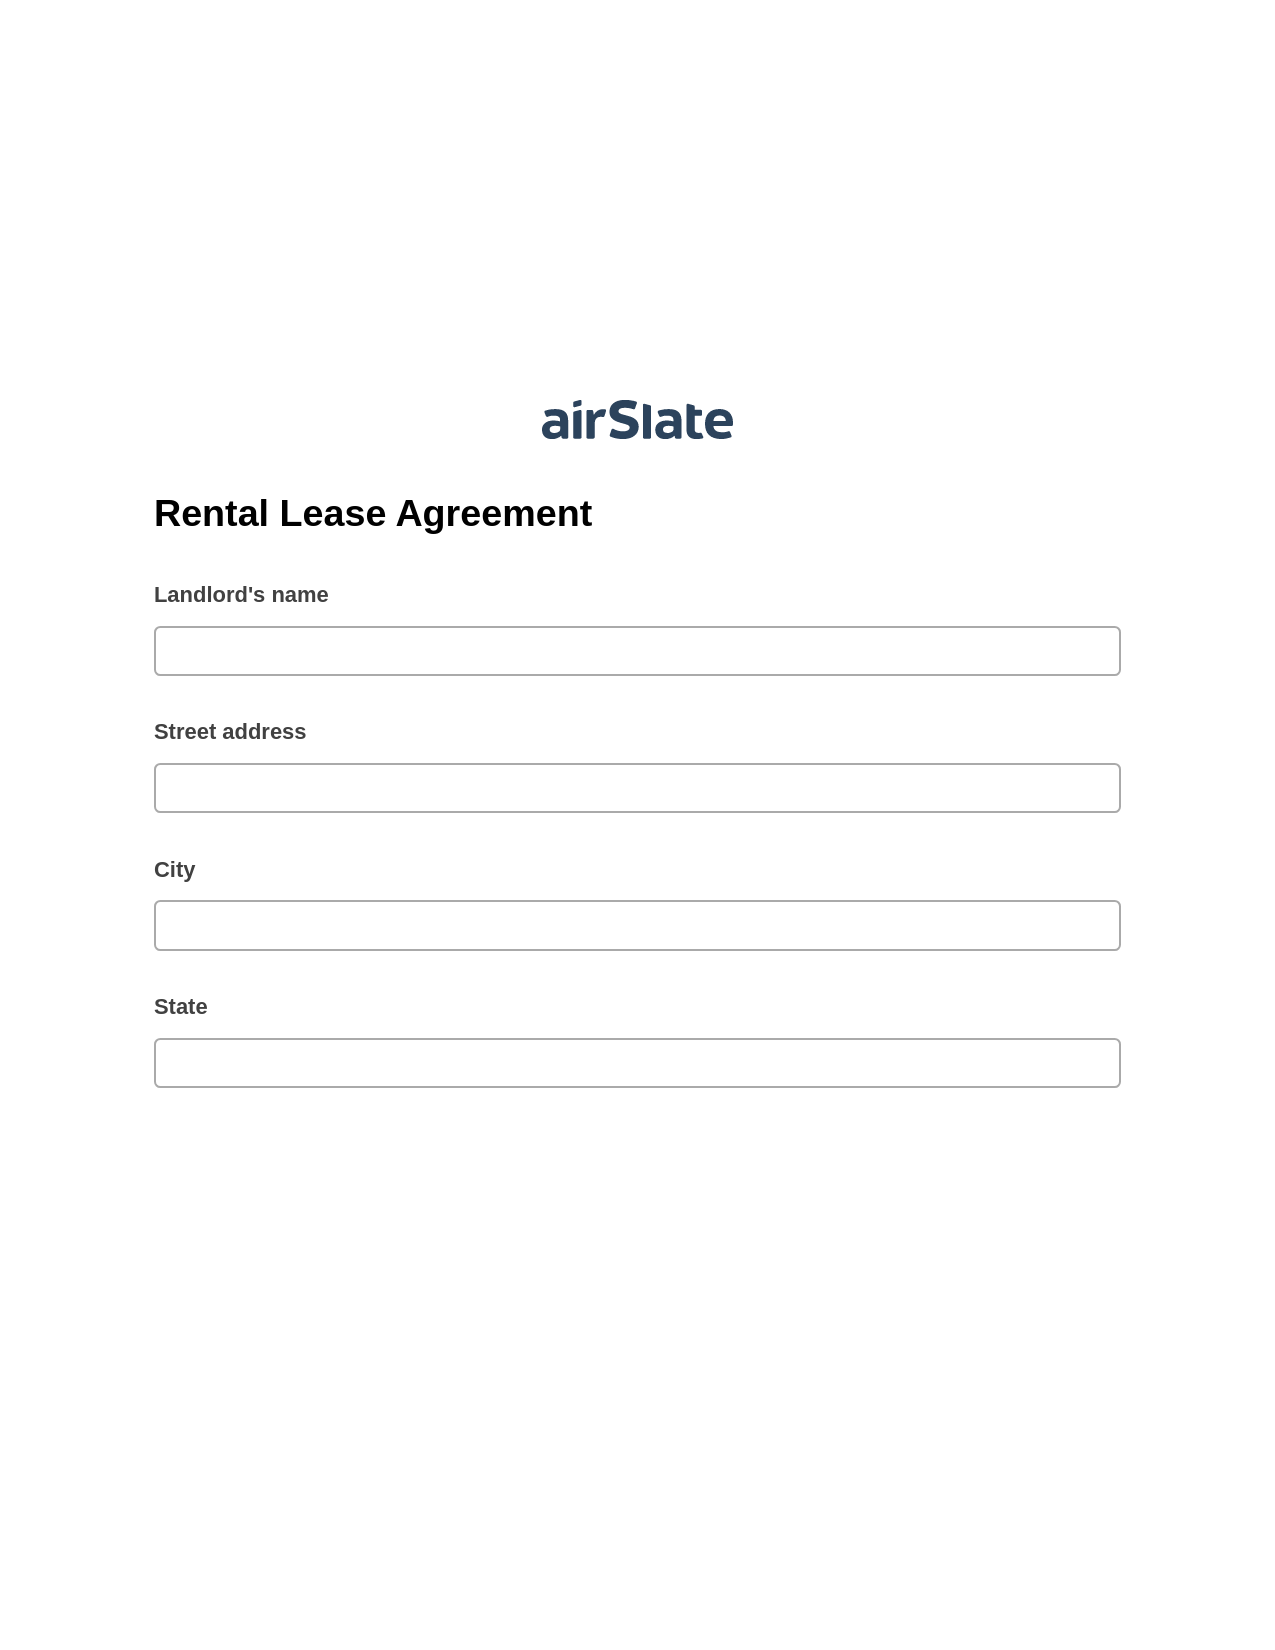 Rental Lease Agreement Pre-fill from Salesforce Records with SOQL Bot, Audit Trail Bot, Export to Formstack Documents Bot